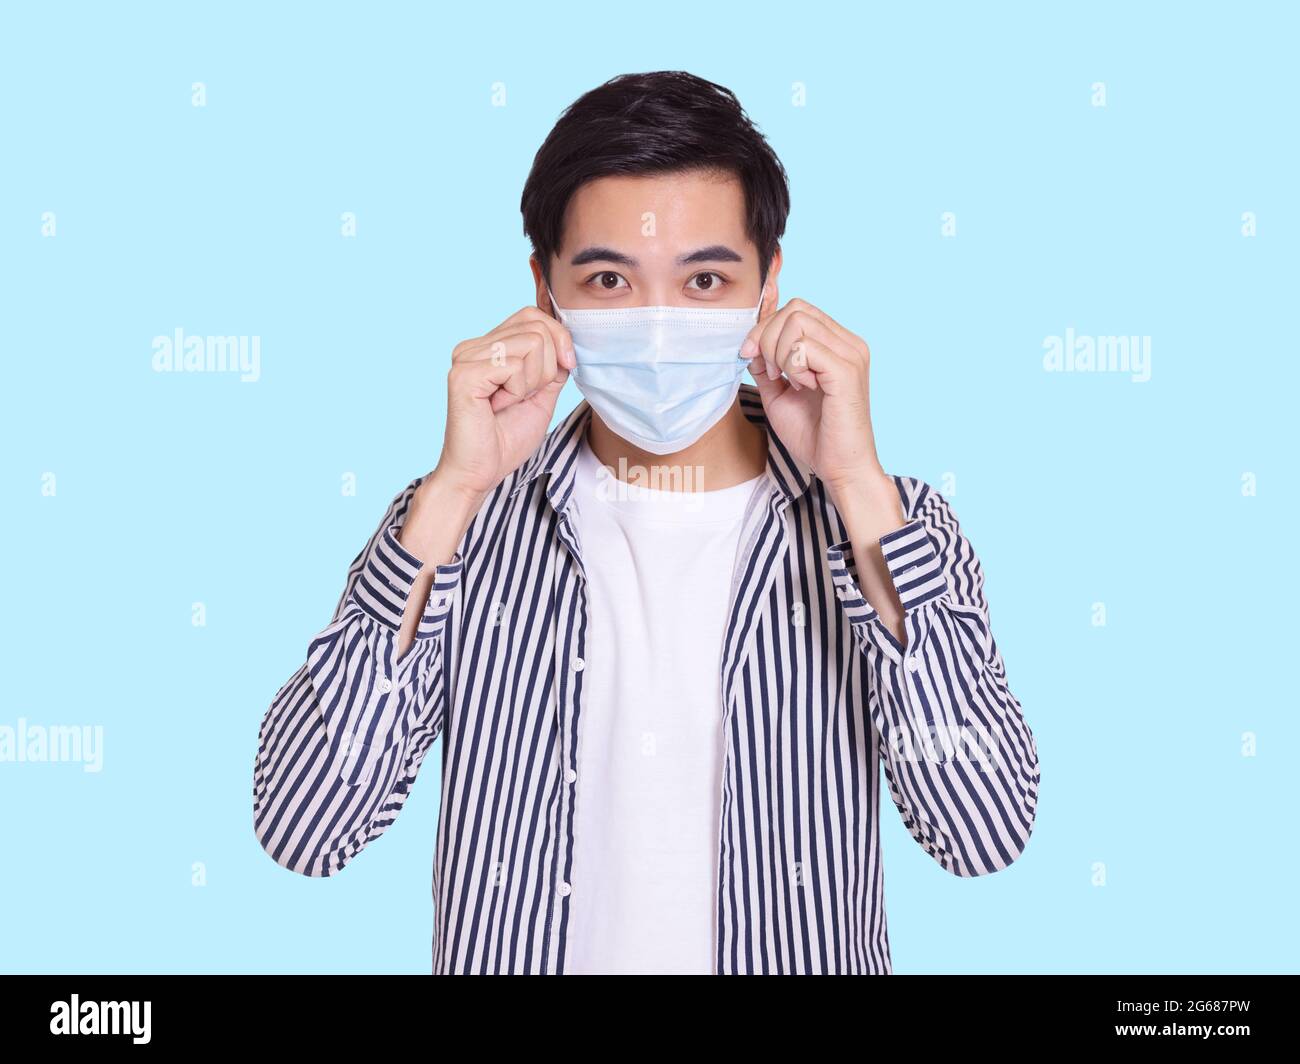 The handsome young man wears a protective medical mask to prevent COVID-19 infection and touches the mask for inspection. Stock Photo